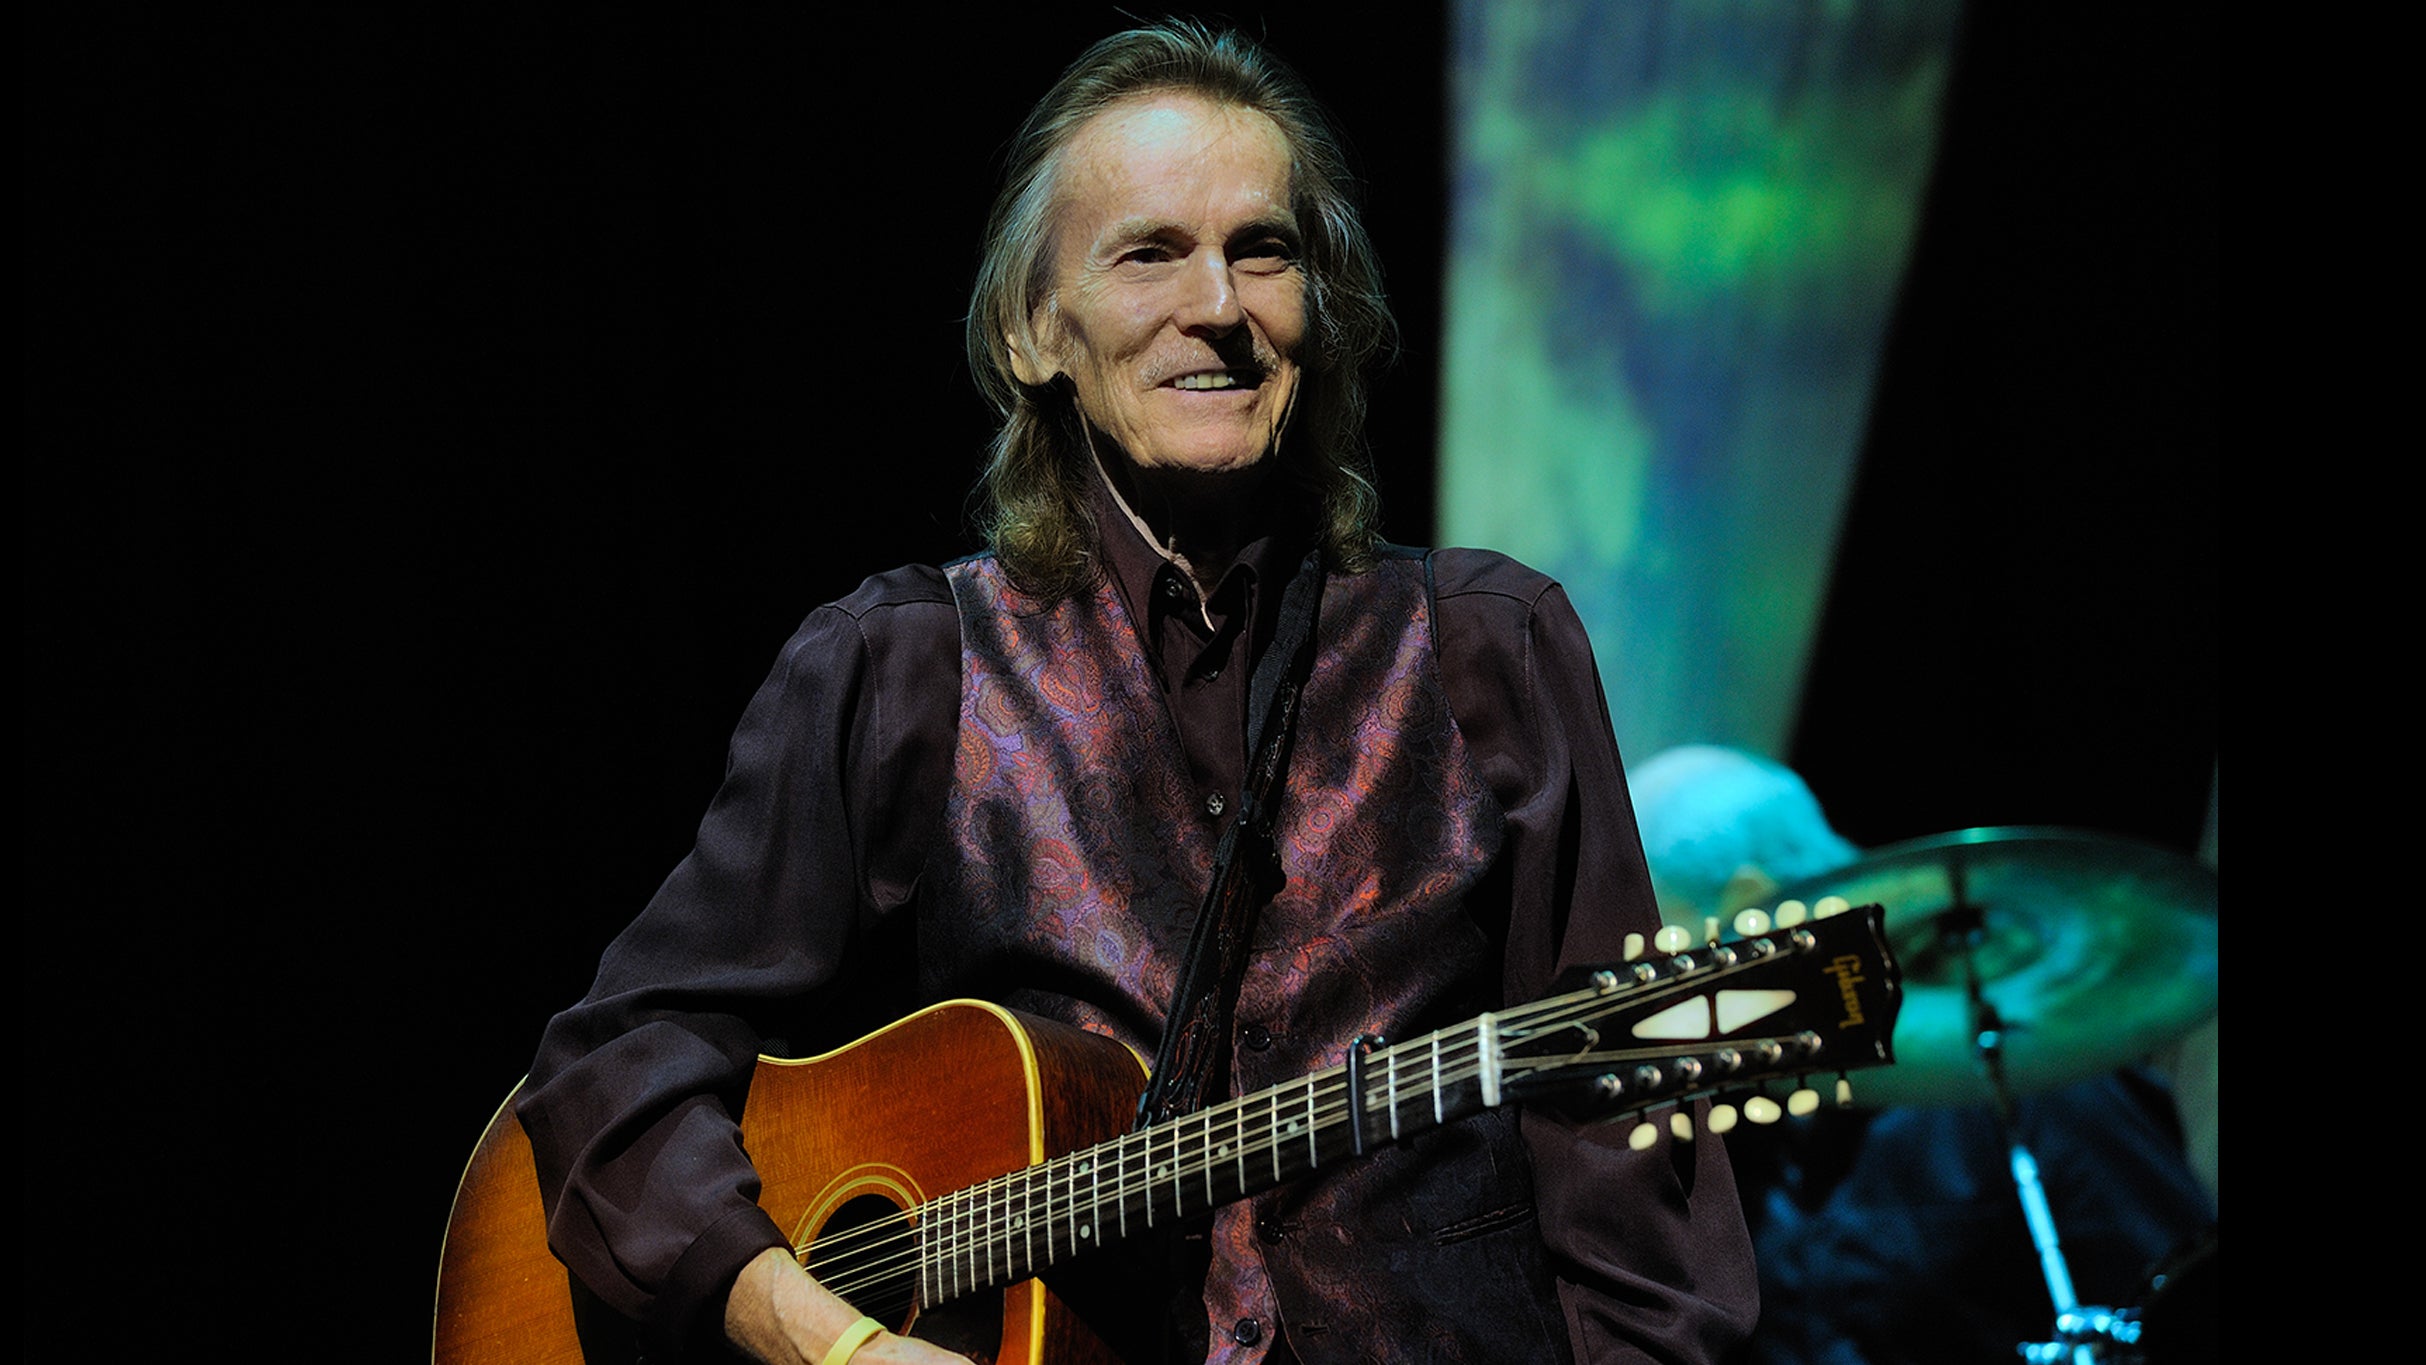 Gordon Lightfoot: The Legend In Concert in Peoria promo photo for Official Platinum presale offer code